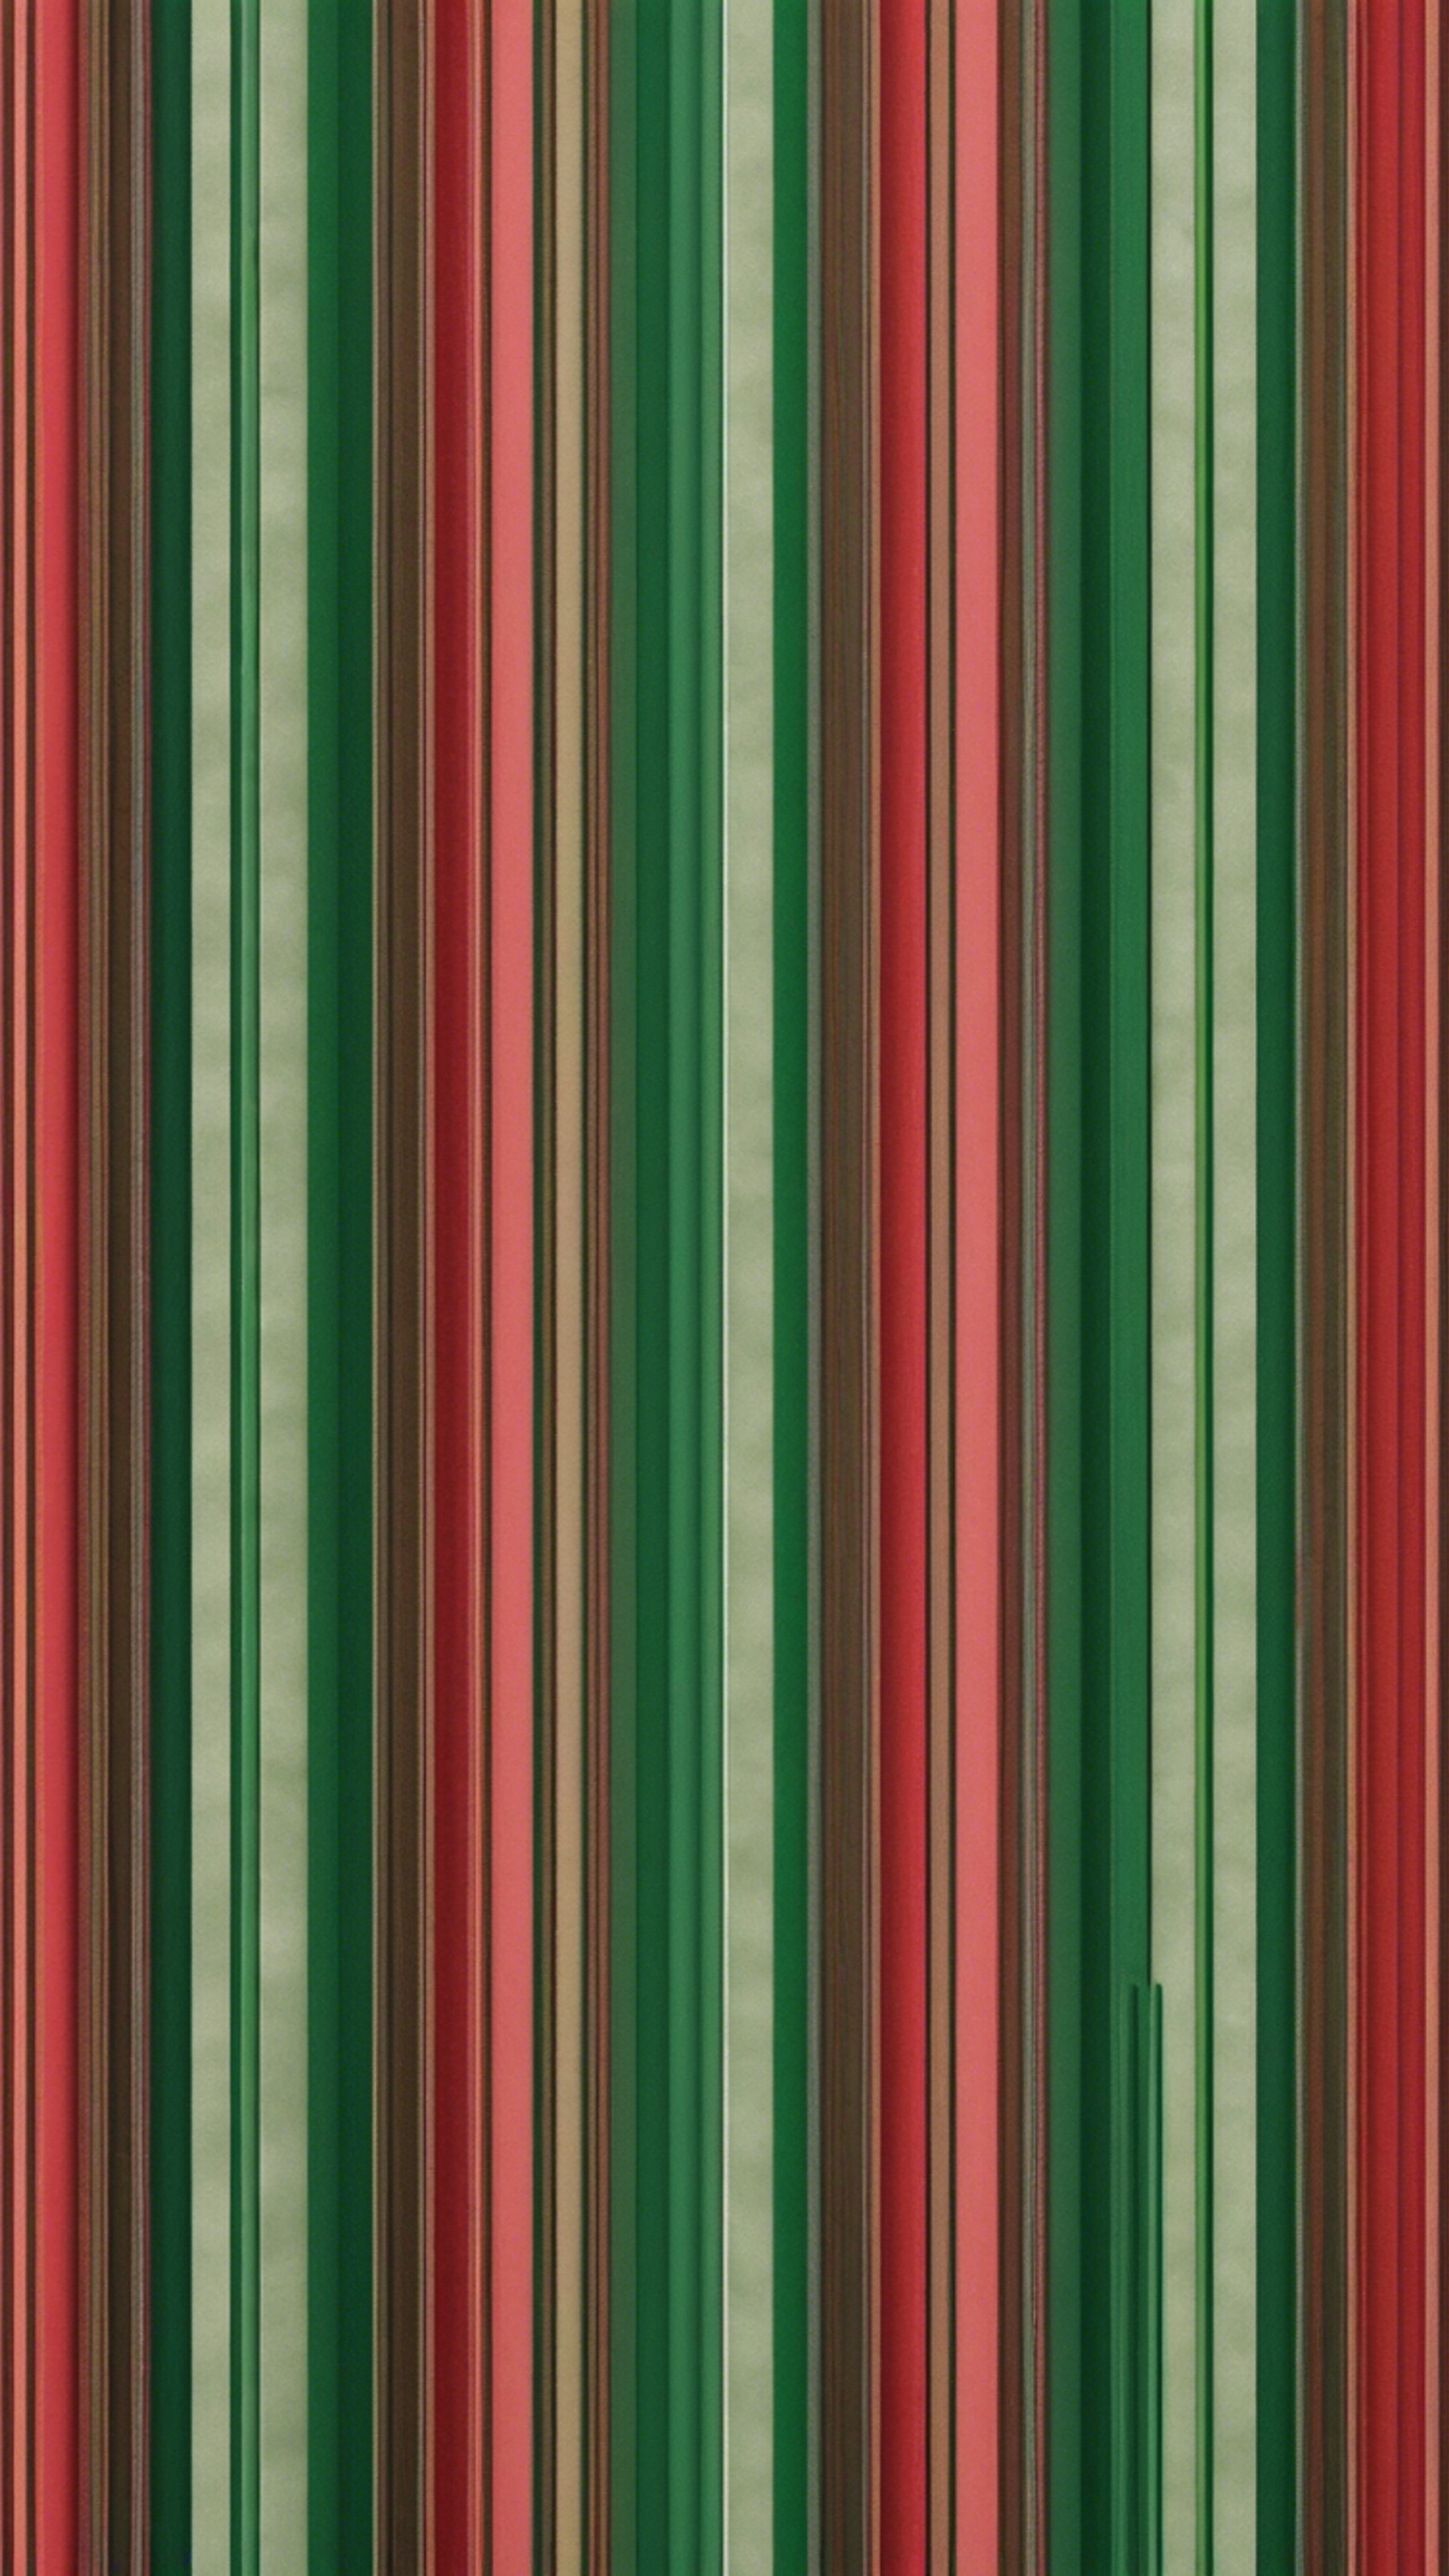 Vivid scarlet and forest green stripes blending seamlessly in a vertically lined pattern.壁紙[d4389ff00769488e9b8d]